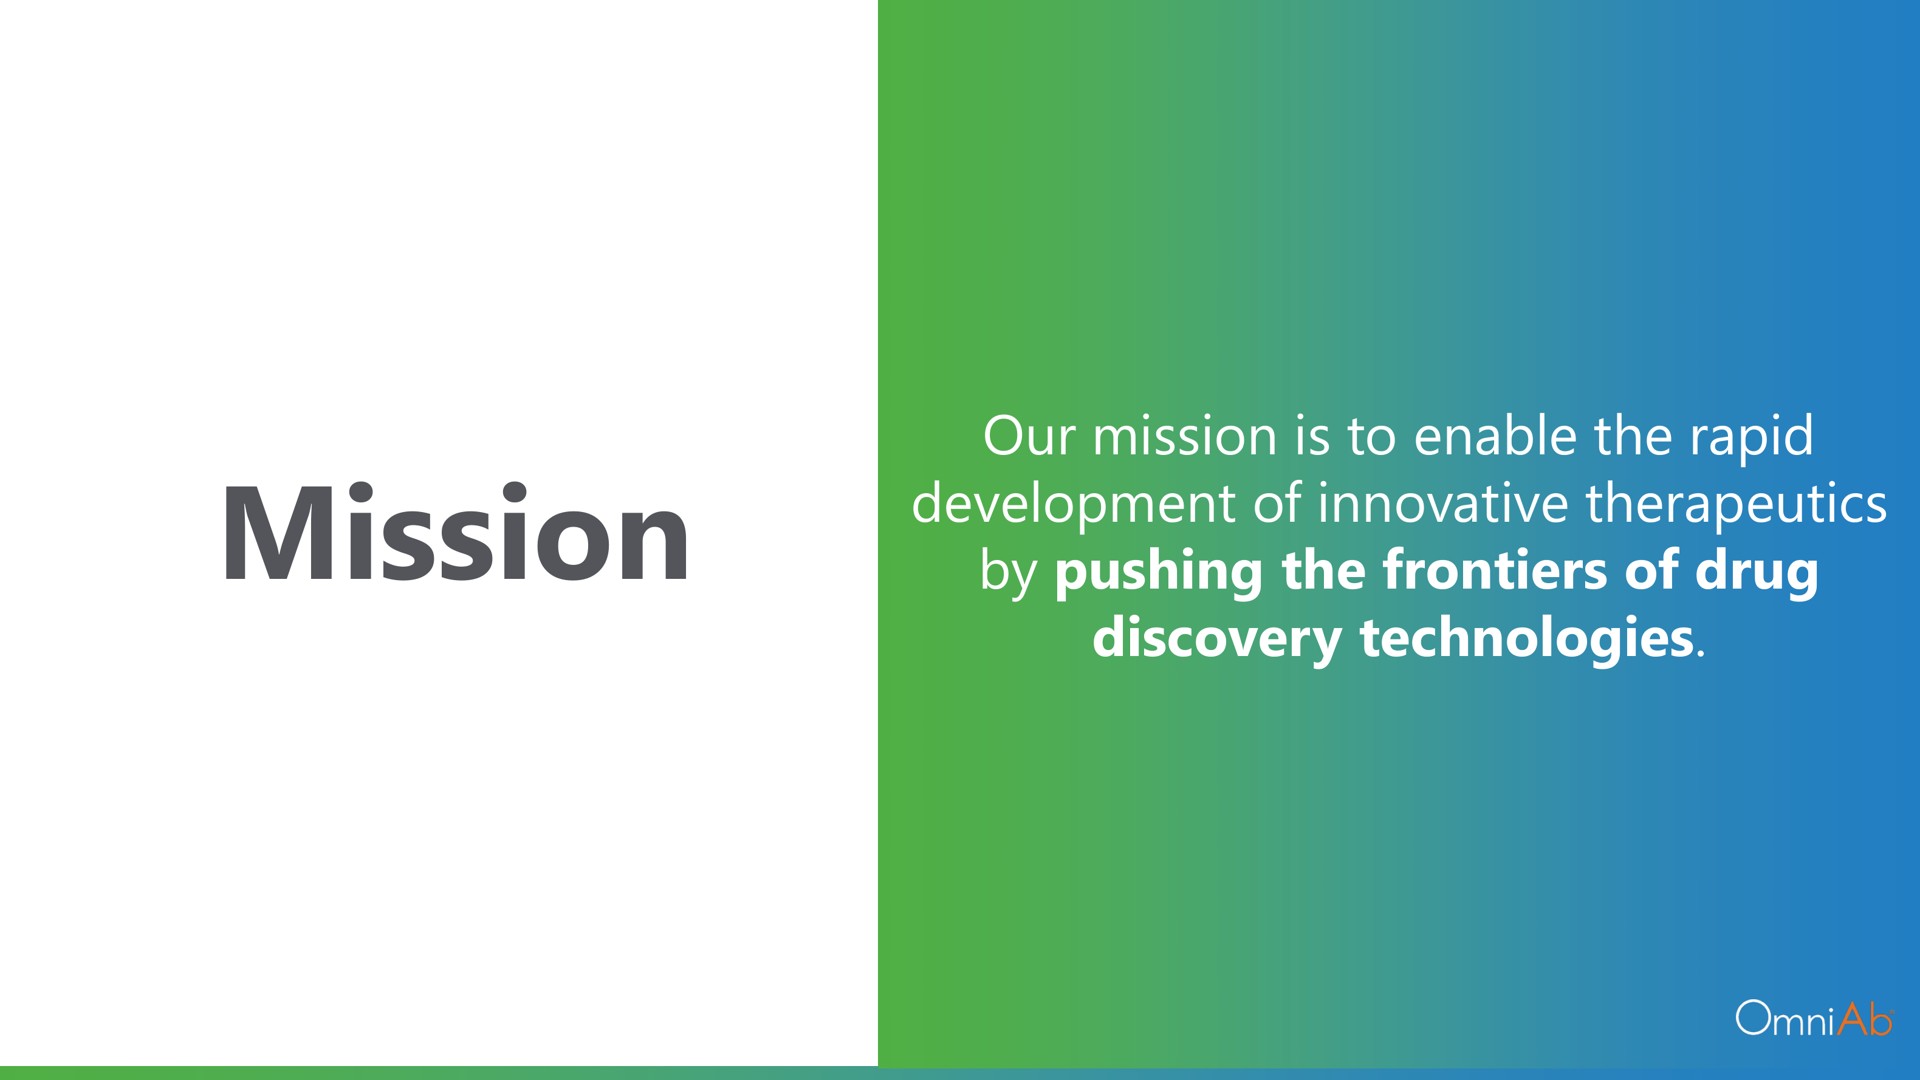 mission our mission is to enable the rapid development of innovative therapeutics by pushing the frontiers of drug discovery technologies | OmniAb